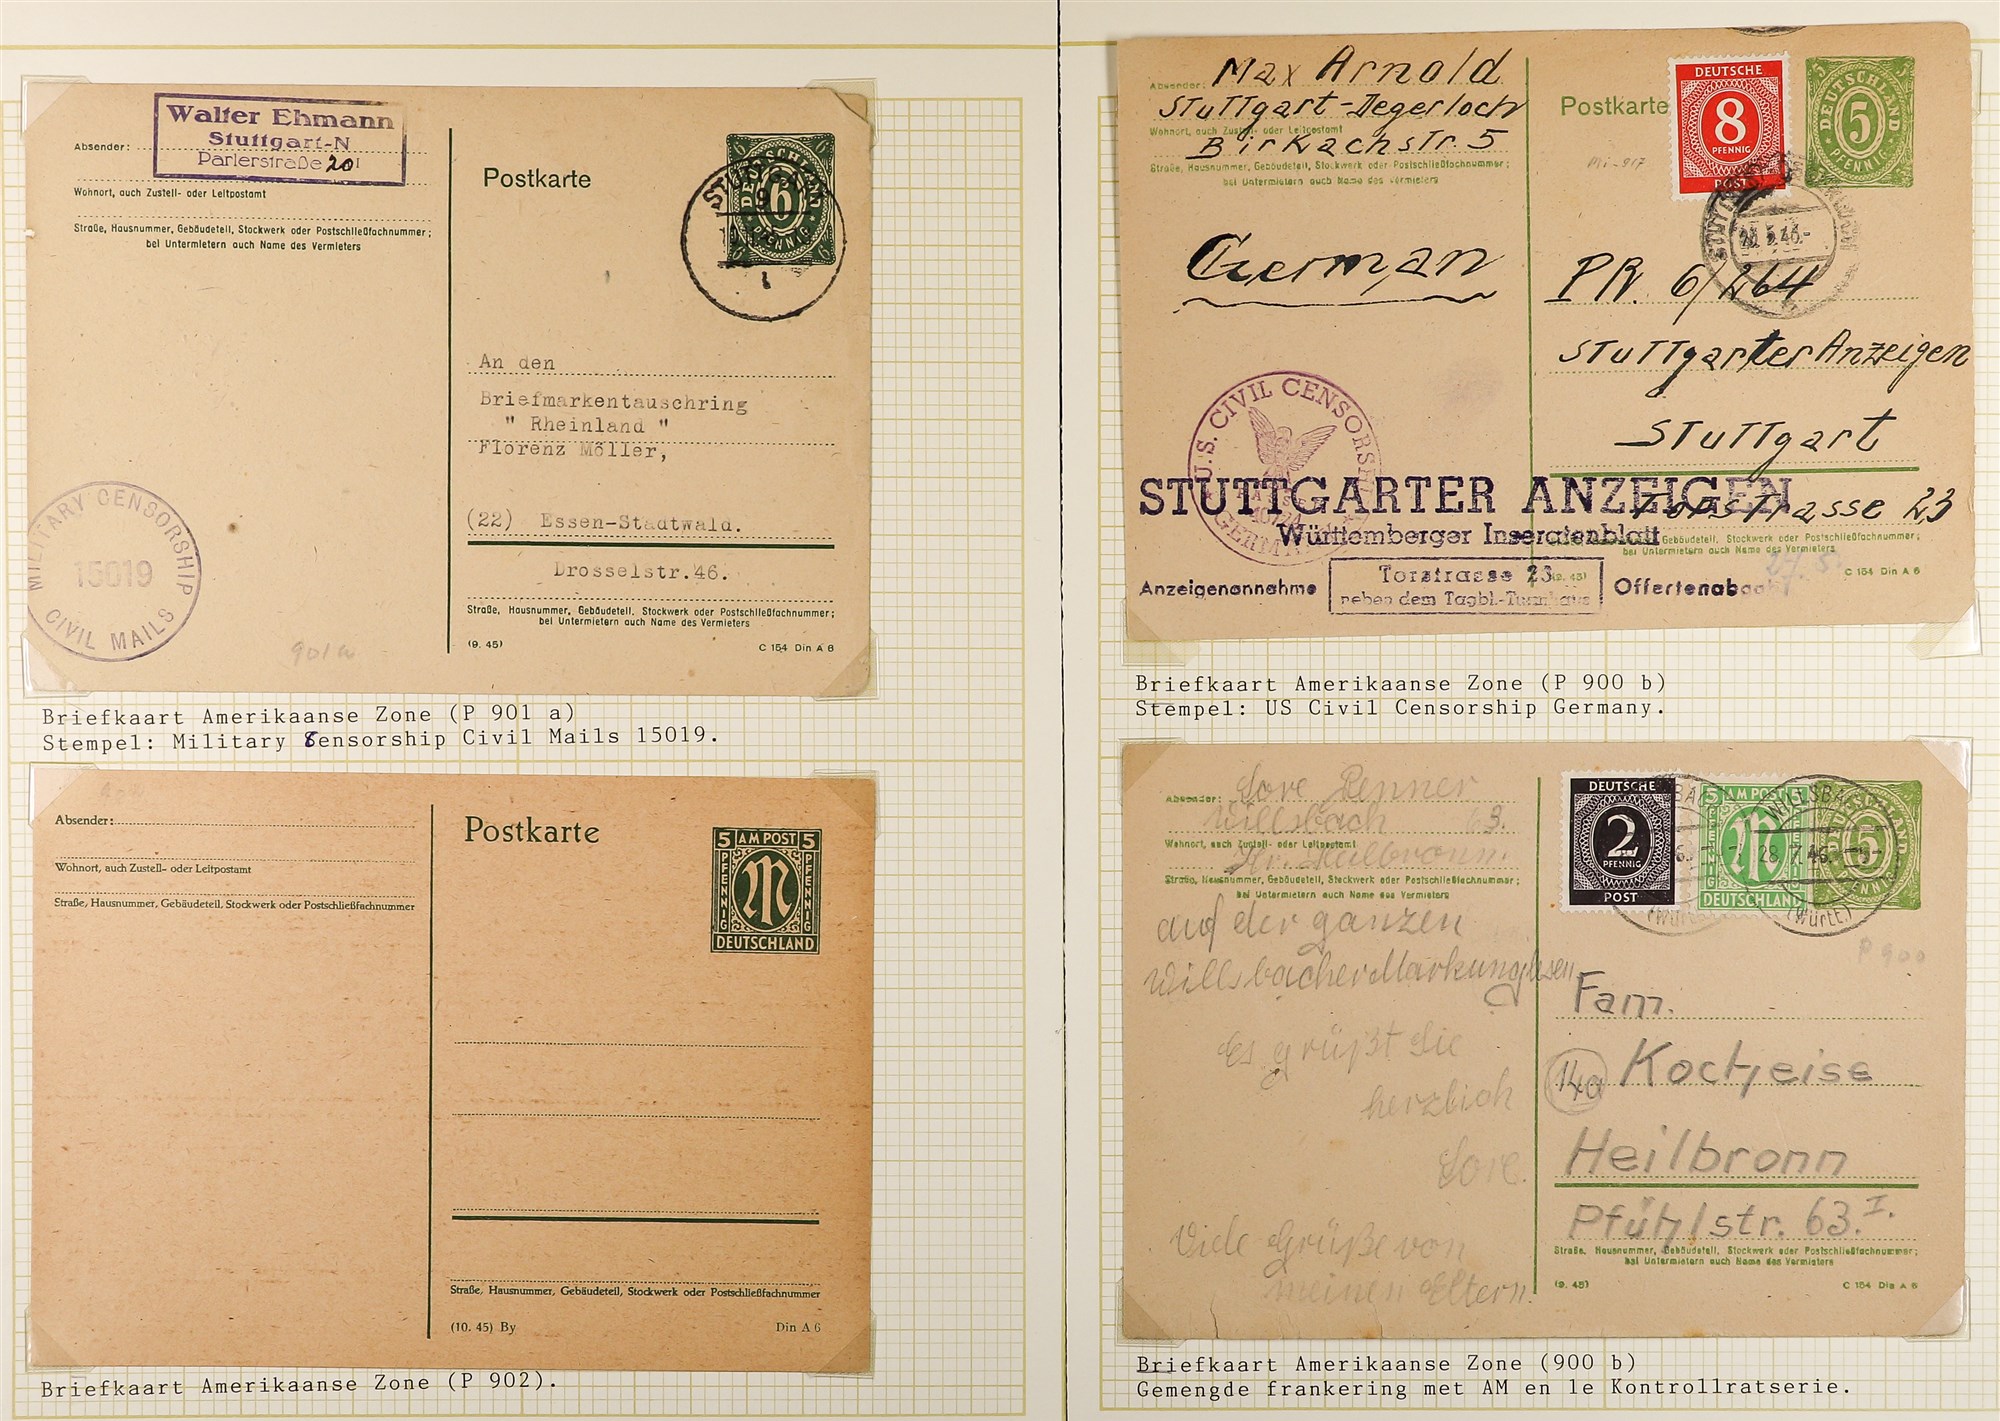 GERMAN ALLIED ZONES 1945 - 1951 COVERS COLLECTION around 60 items from various allied zones, - Image 3 of 16